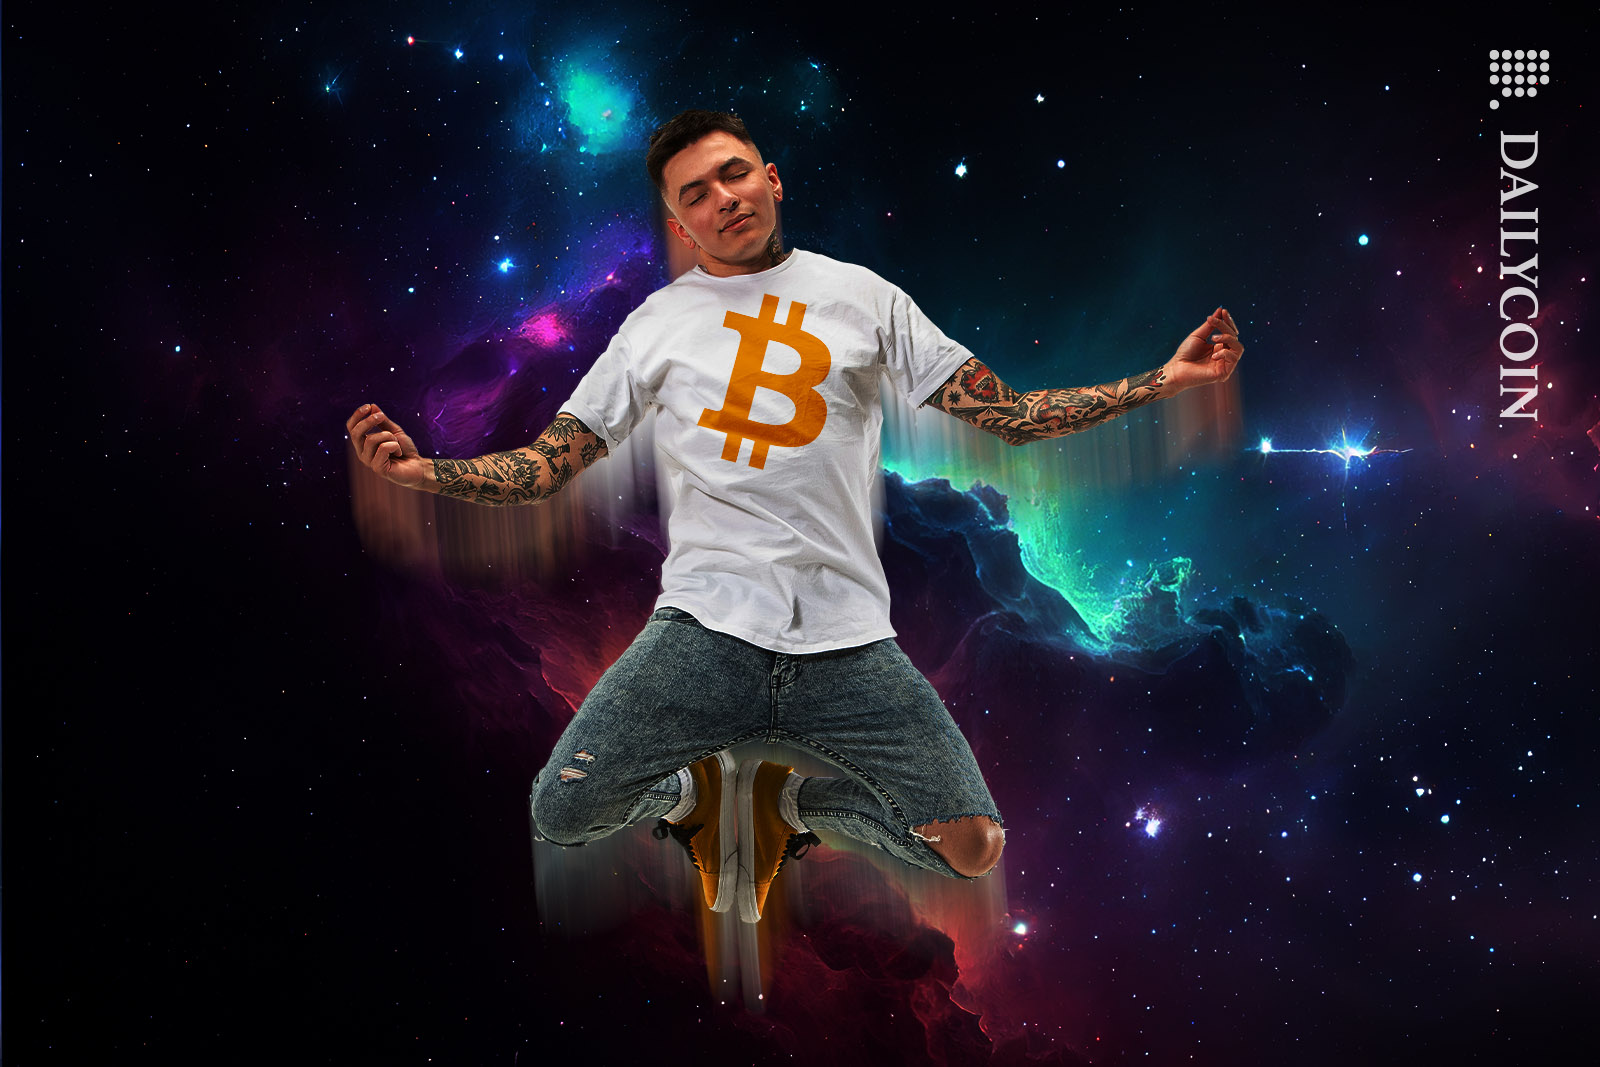 Man in a Bitcoin t-shirt floating in space peacefully.